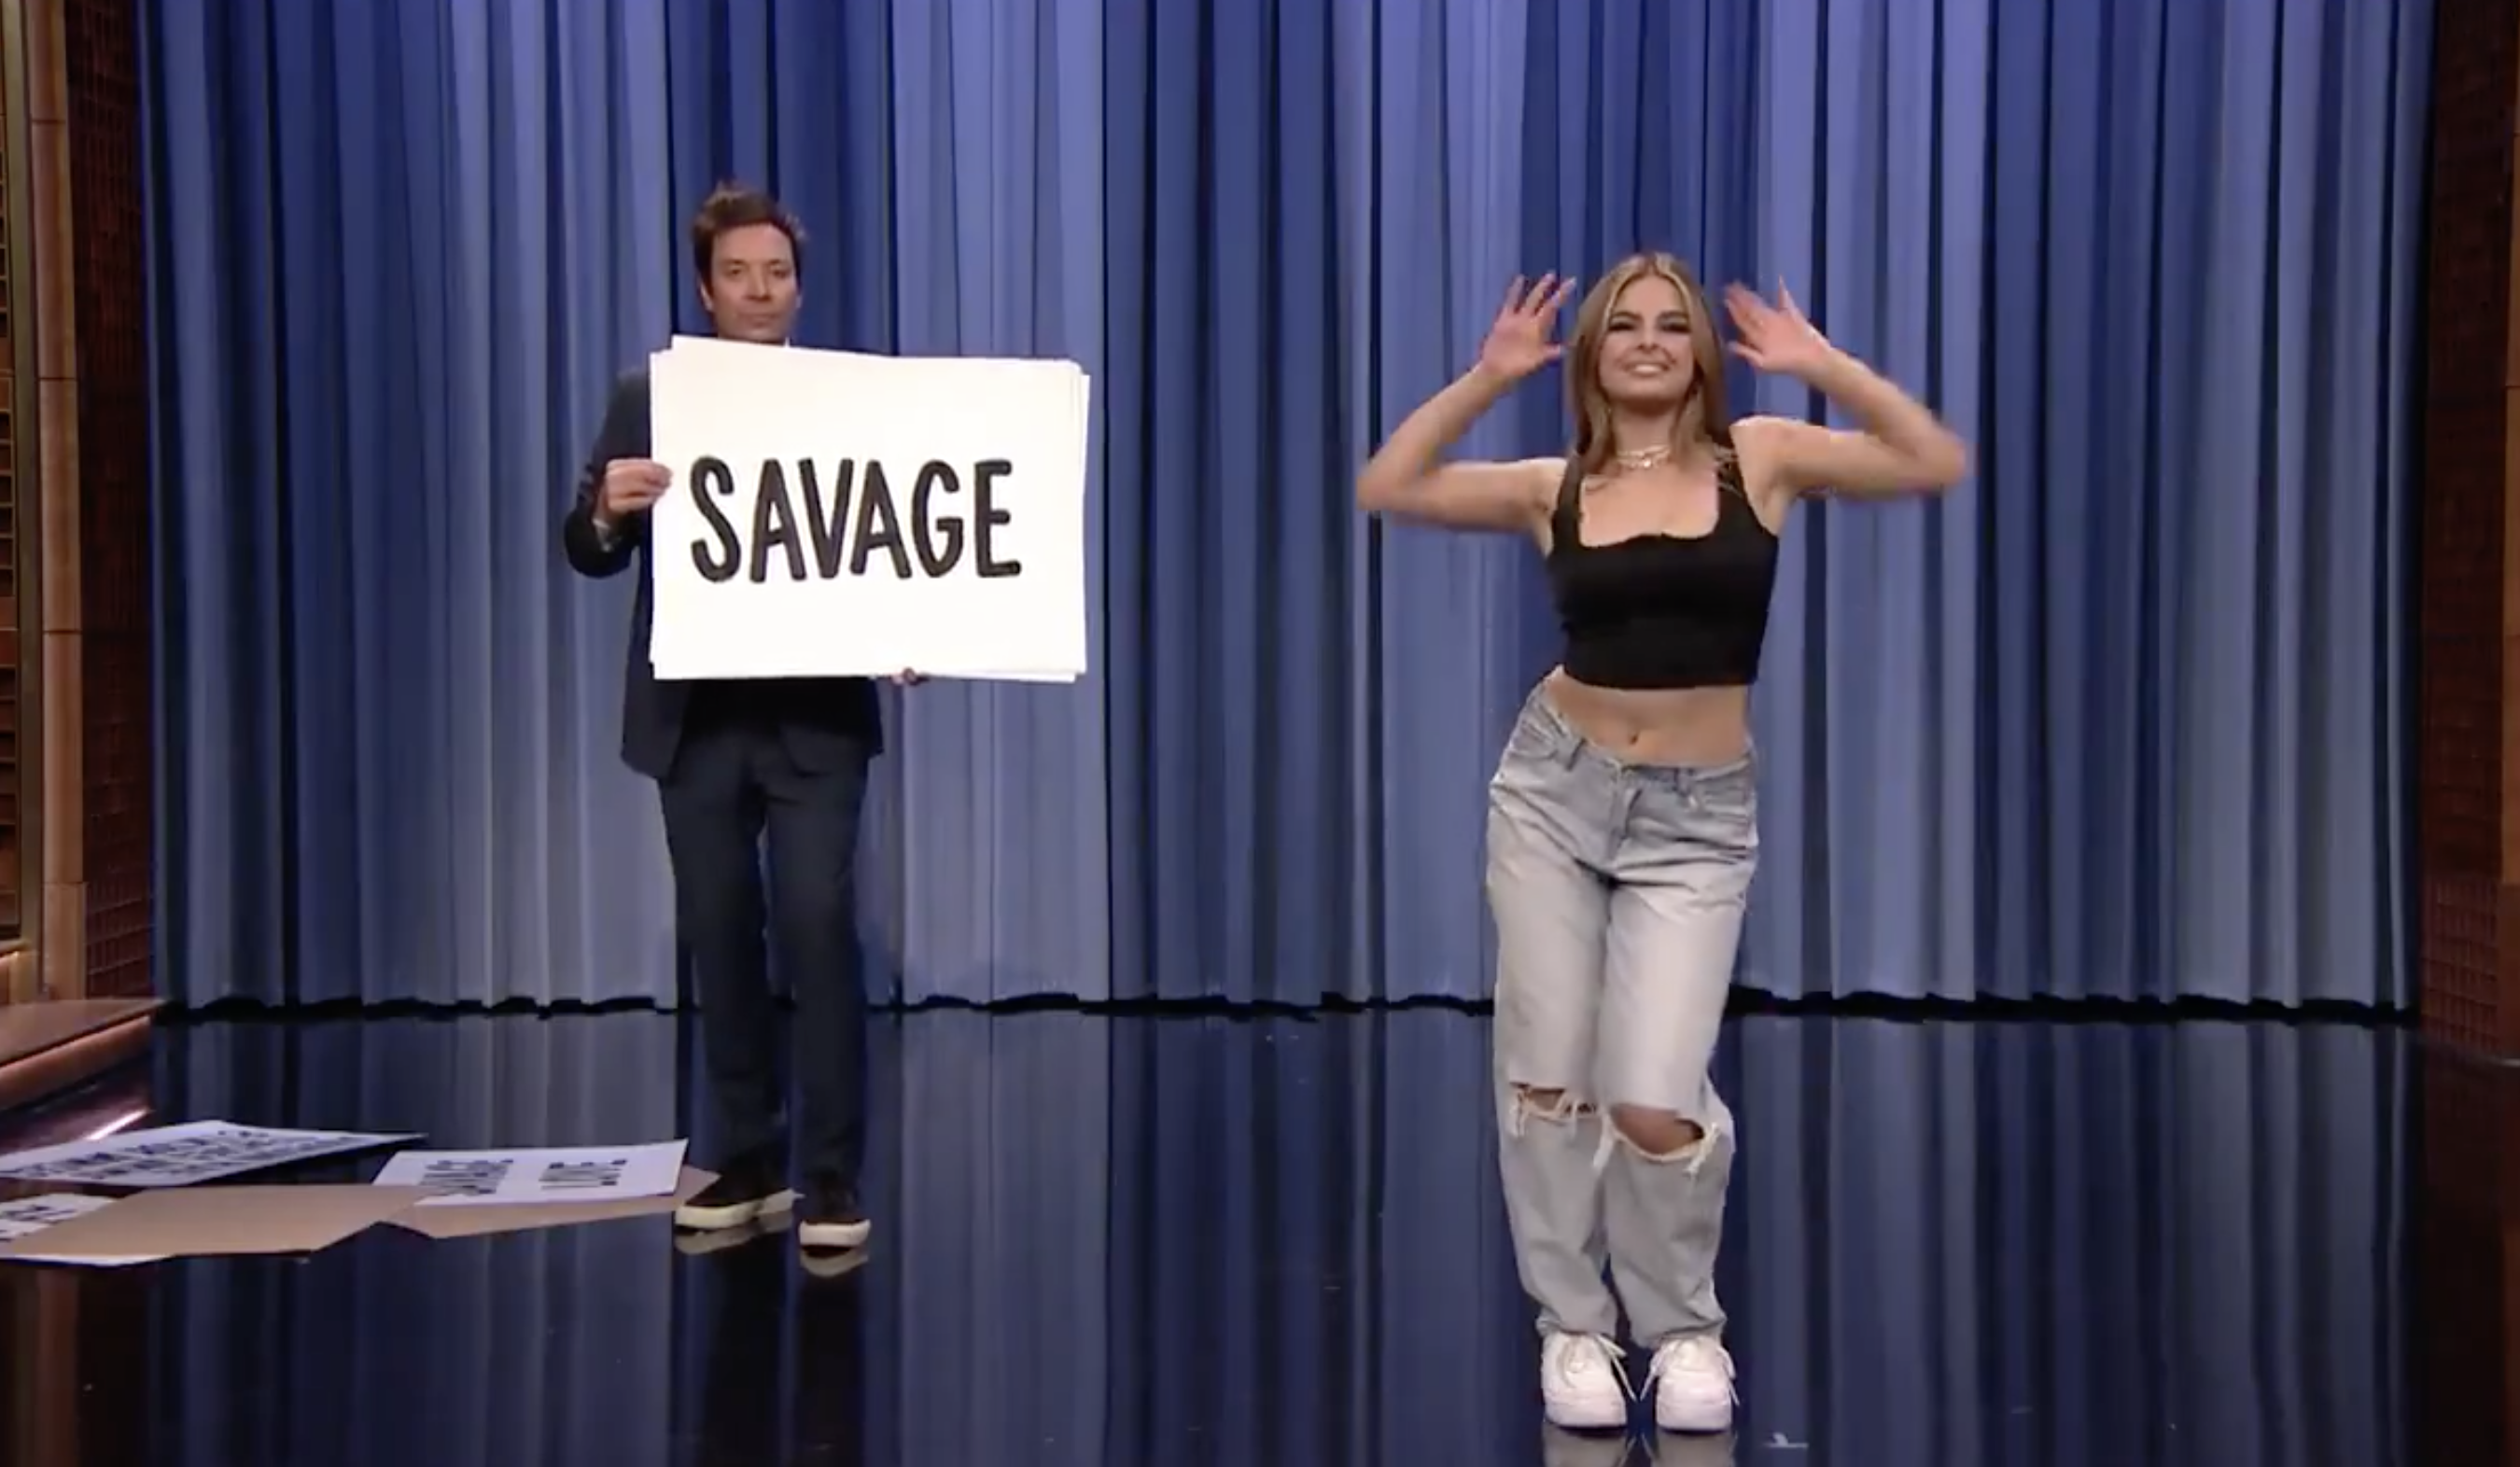 Scene from the Fallon show with Jimmy holding up a sign that says &quot;Savage&quot; standing onstage with Addison Rae